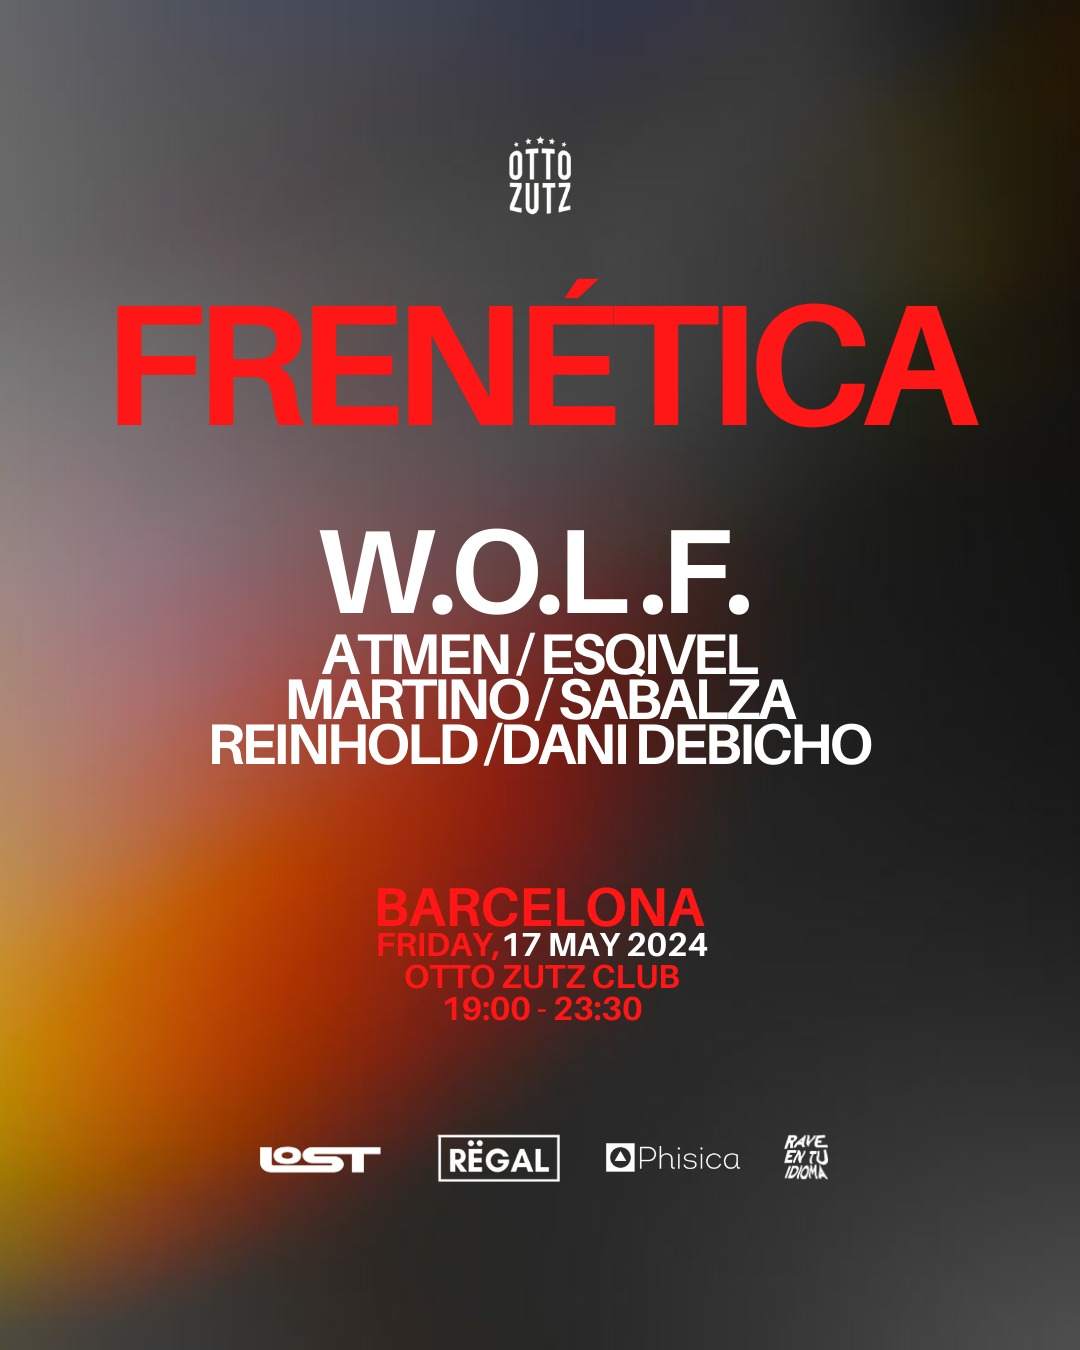 FRENÉTICA Pres W.O.L.F. (DAY PARTY  FREE TICKETS TILL 20:30) - フライヤー表